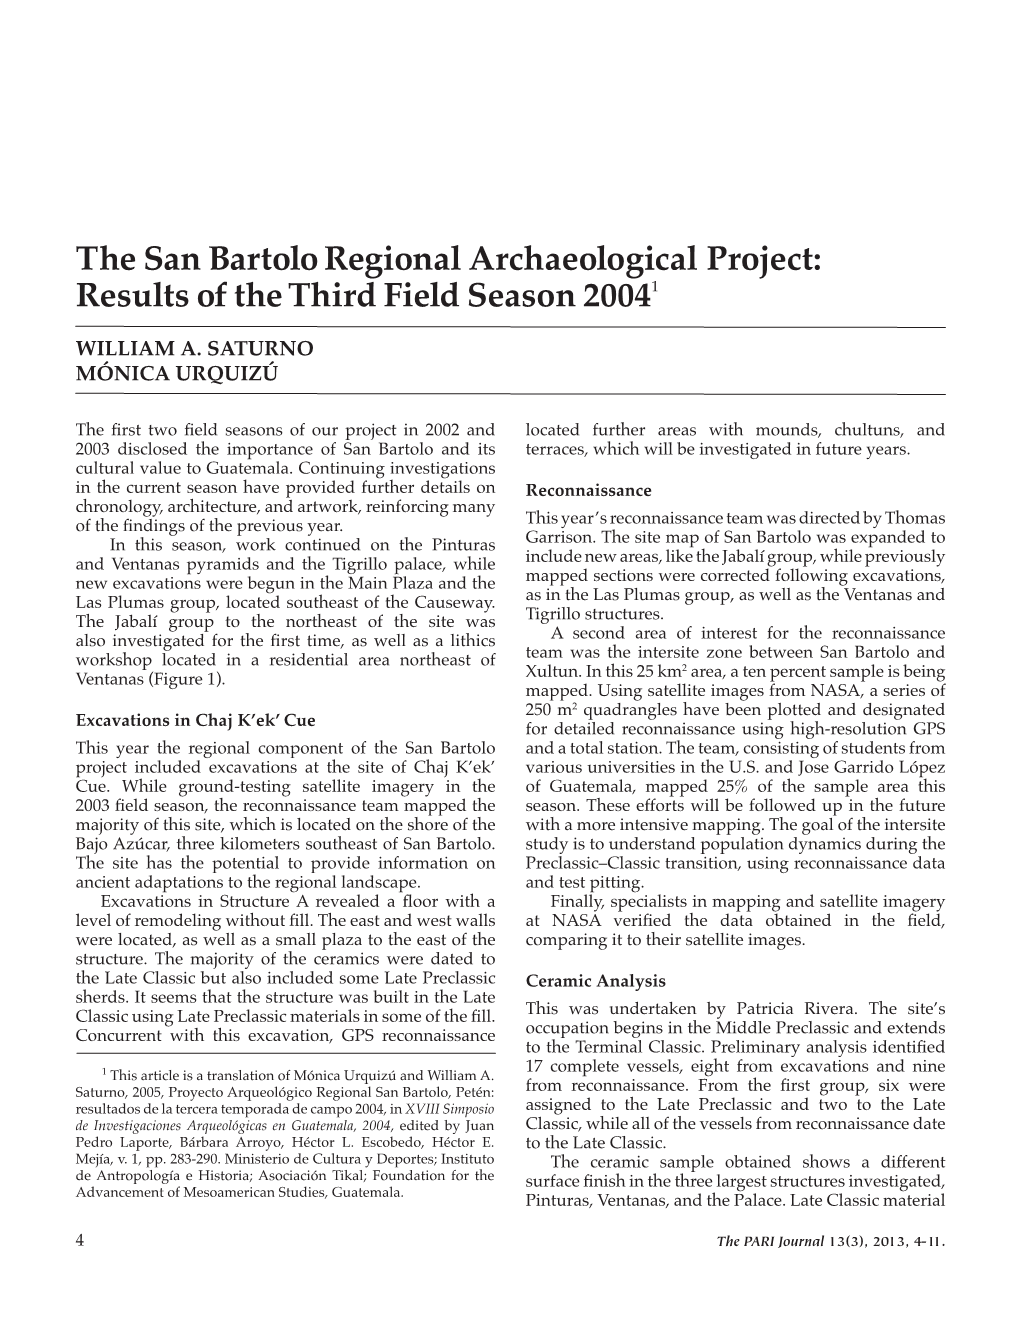 The San Bartolo Regional Archaeological Project: Results of the Third Field Season 20041